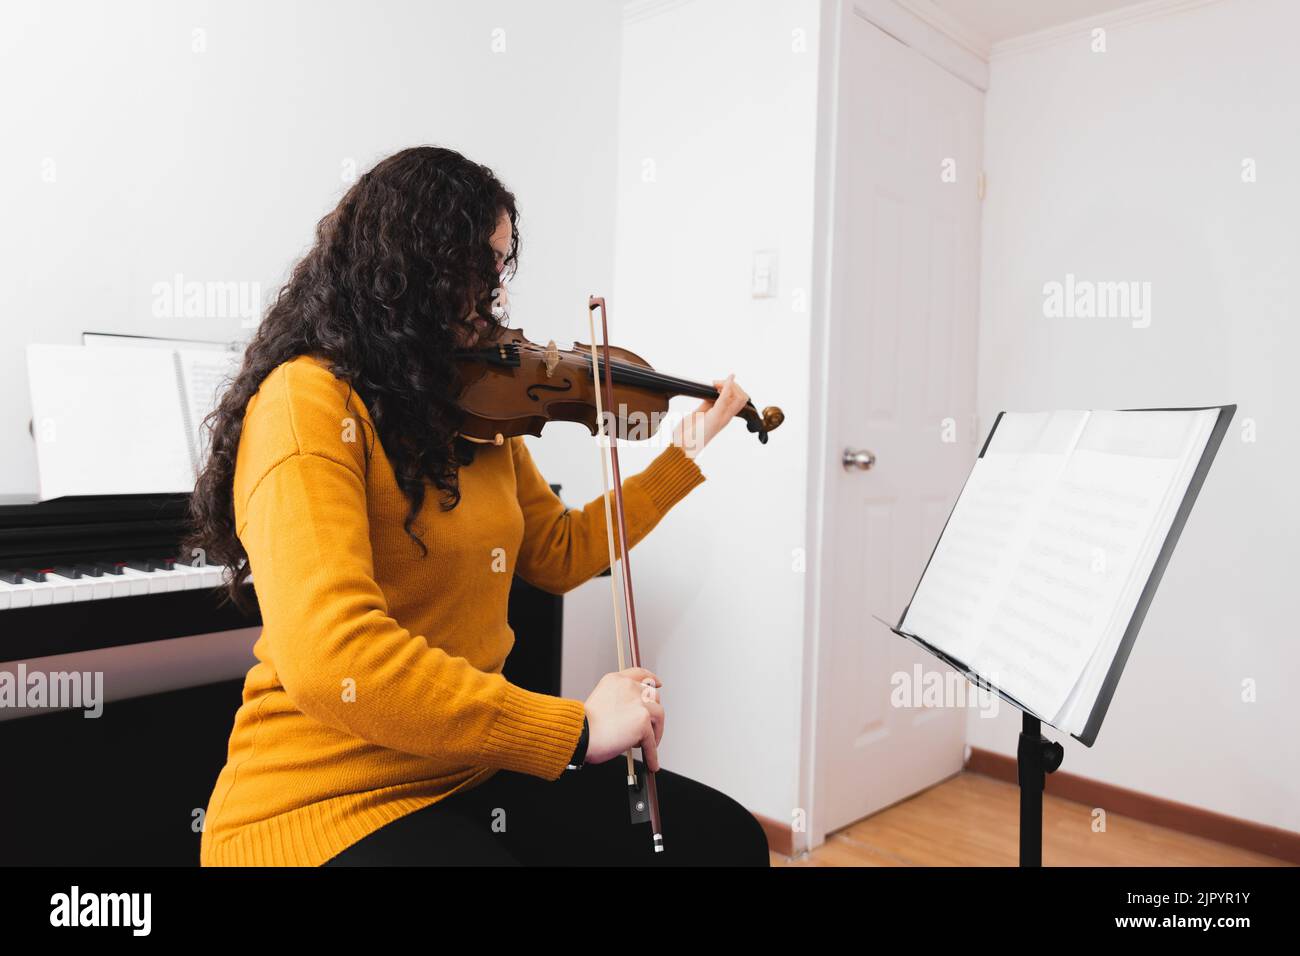 Brunette woman wearing a yellow sweater, and playing violin by reading sheet music. Stock Photo